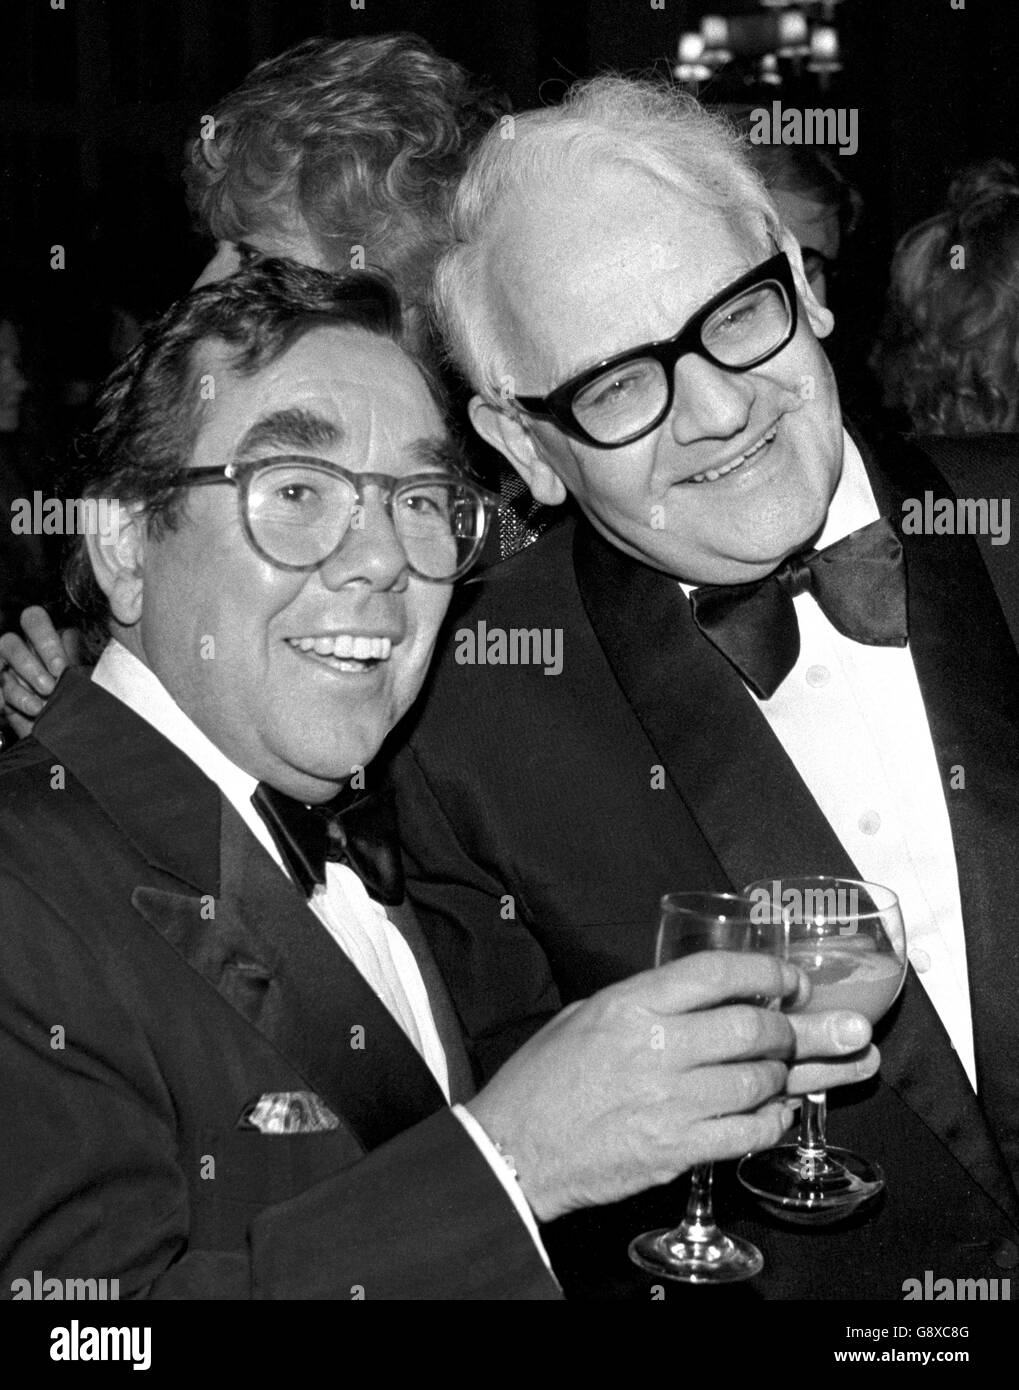 Theatre - Harold Fielding's Ziegfeld - Backstage Party - London. Comedians Ronnie Corbett (left) and Ronnie Barker, the BBC's comic team, 'The Two Ronnies'. Stock Photo